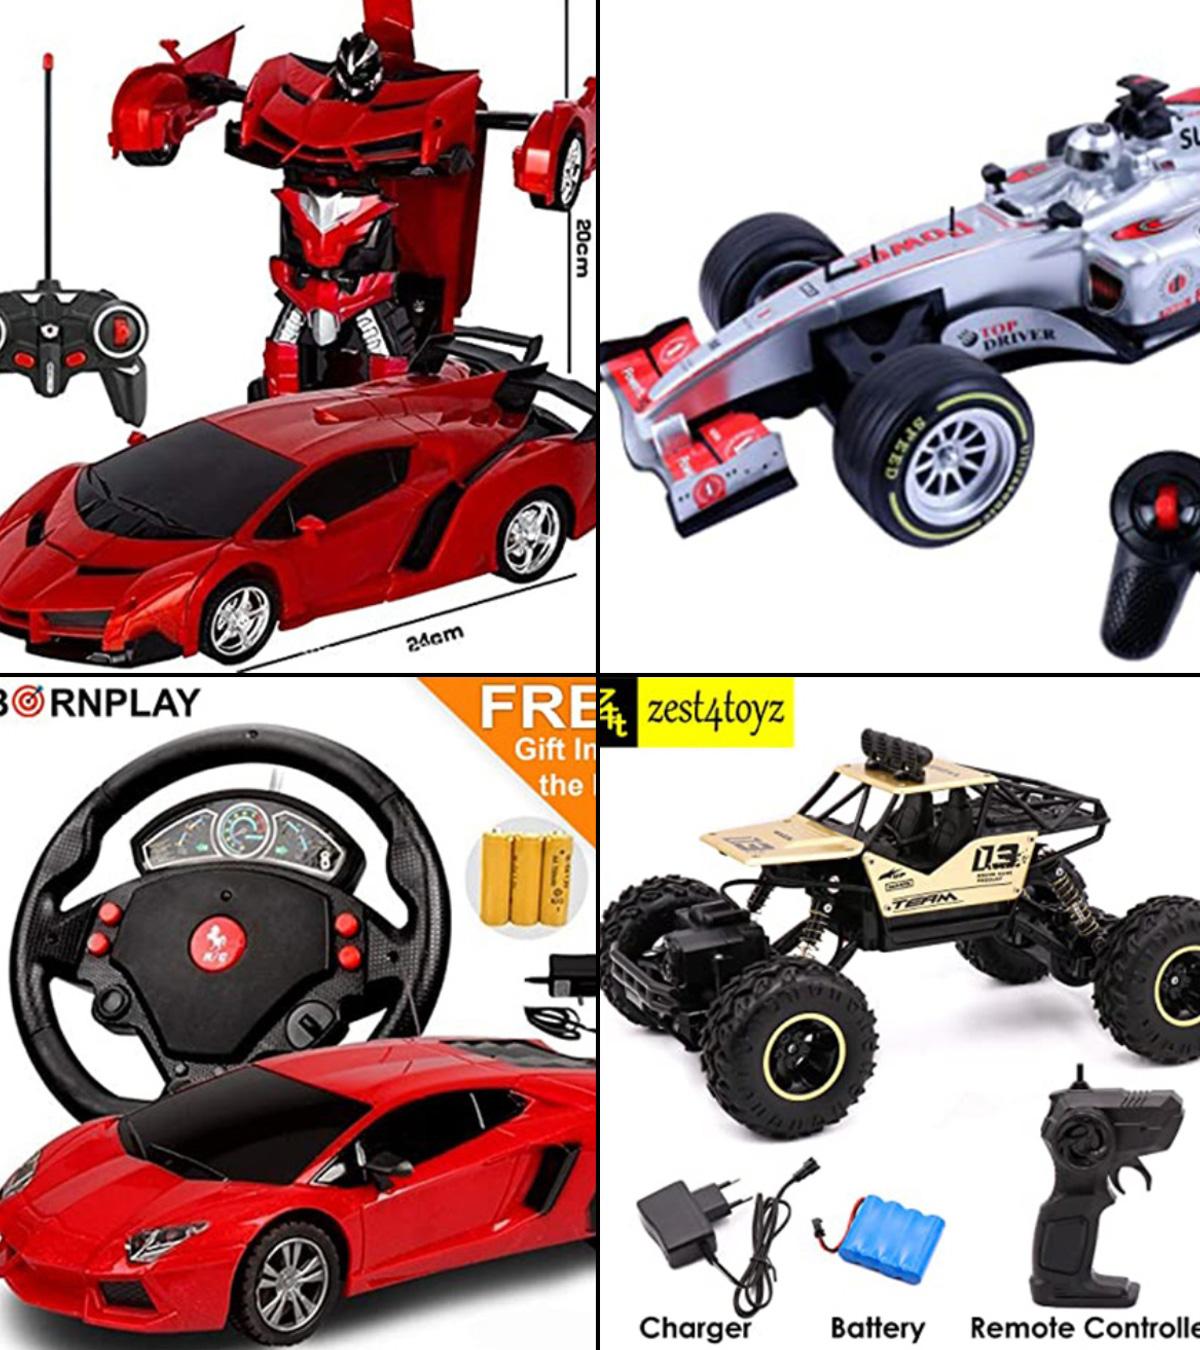 Red Remote Control Car: Evolution of Remote Control Cars: From Toy Cars to the Red Racing Machine